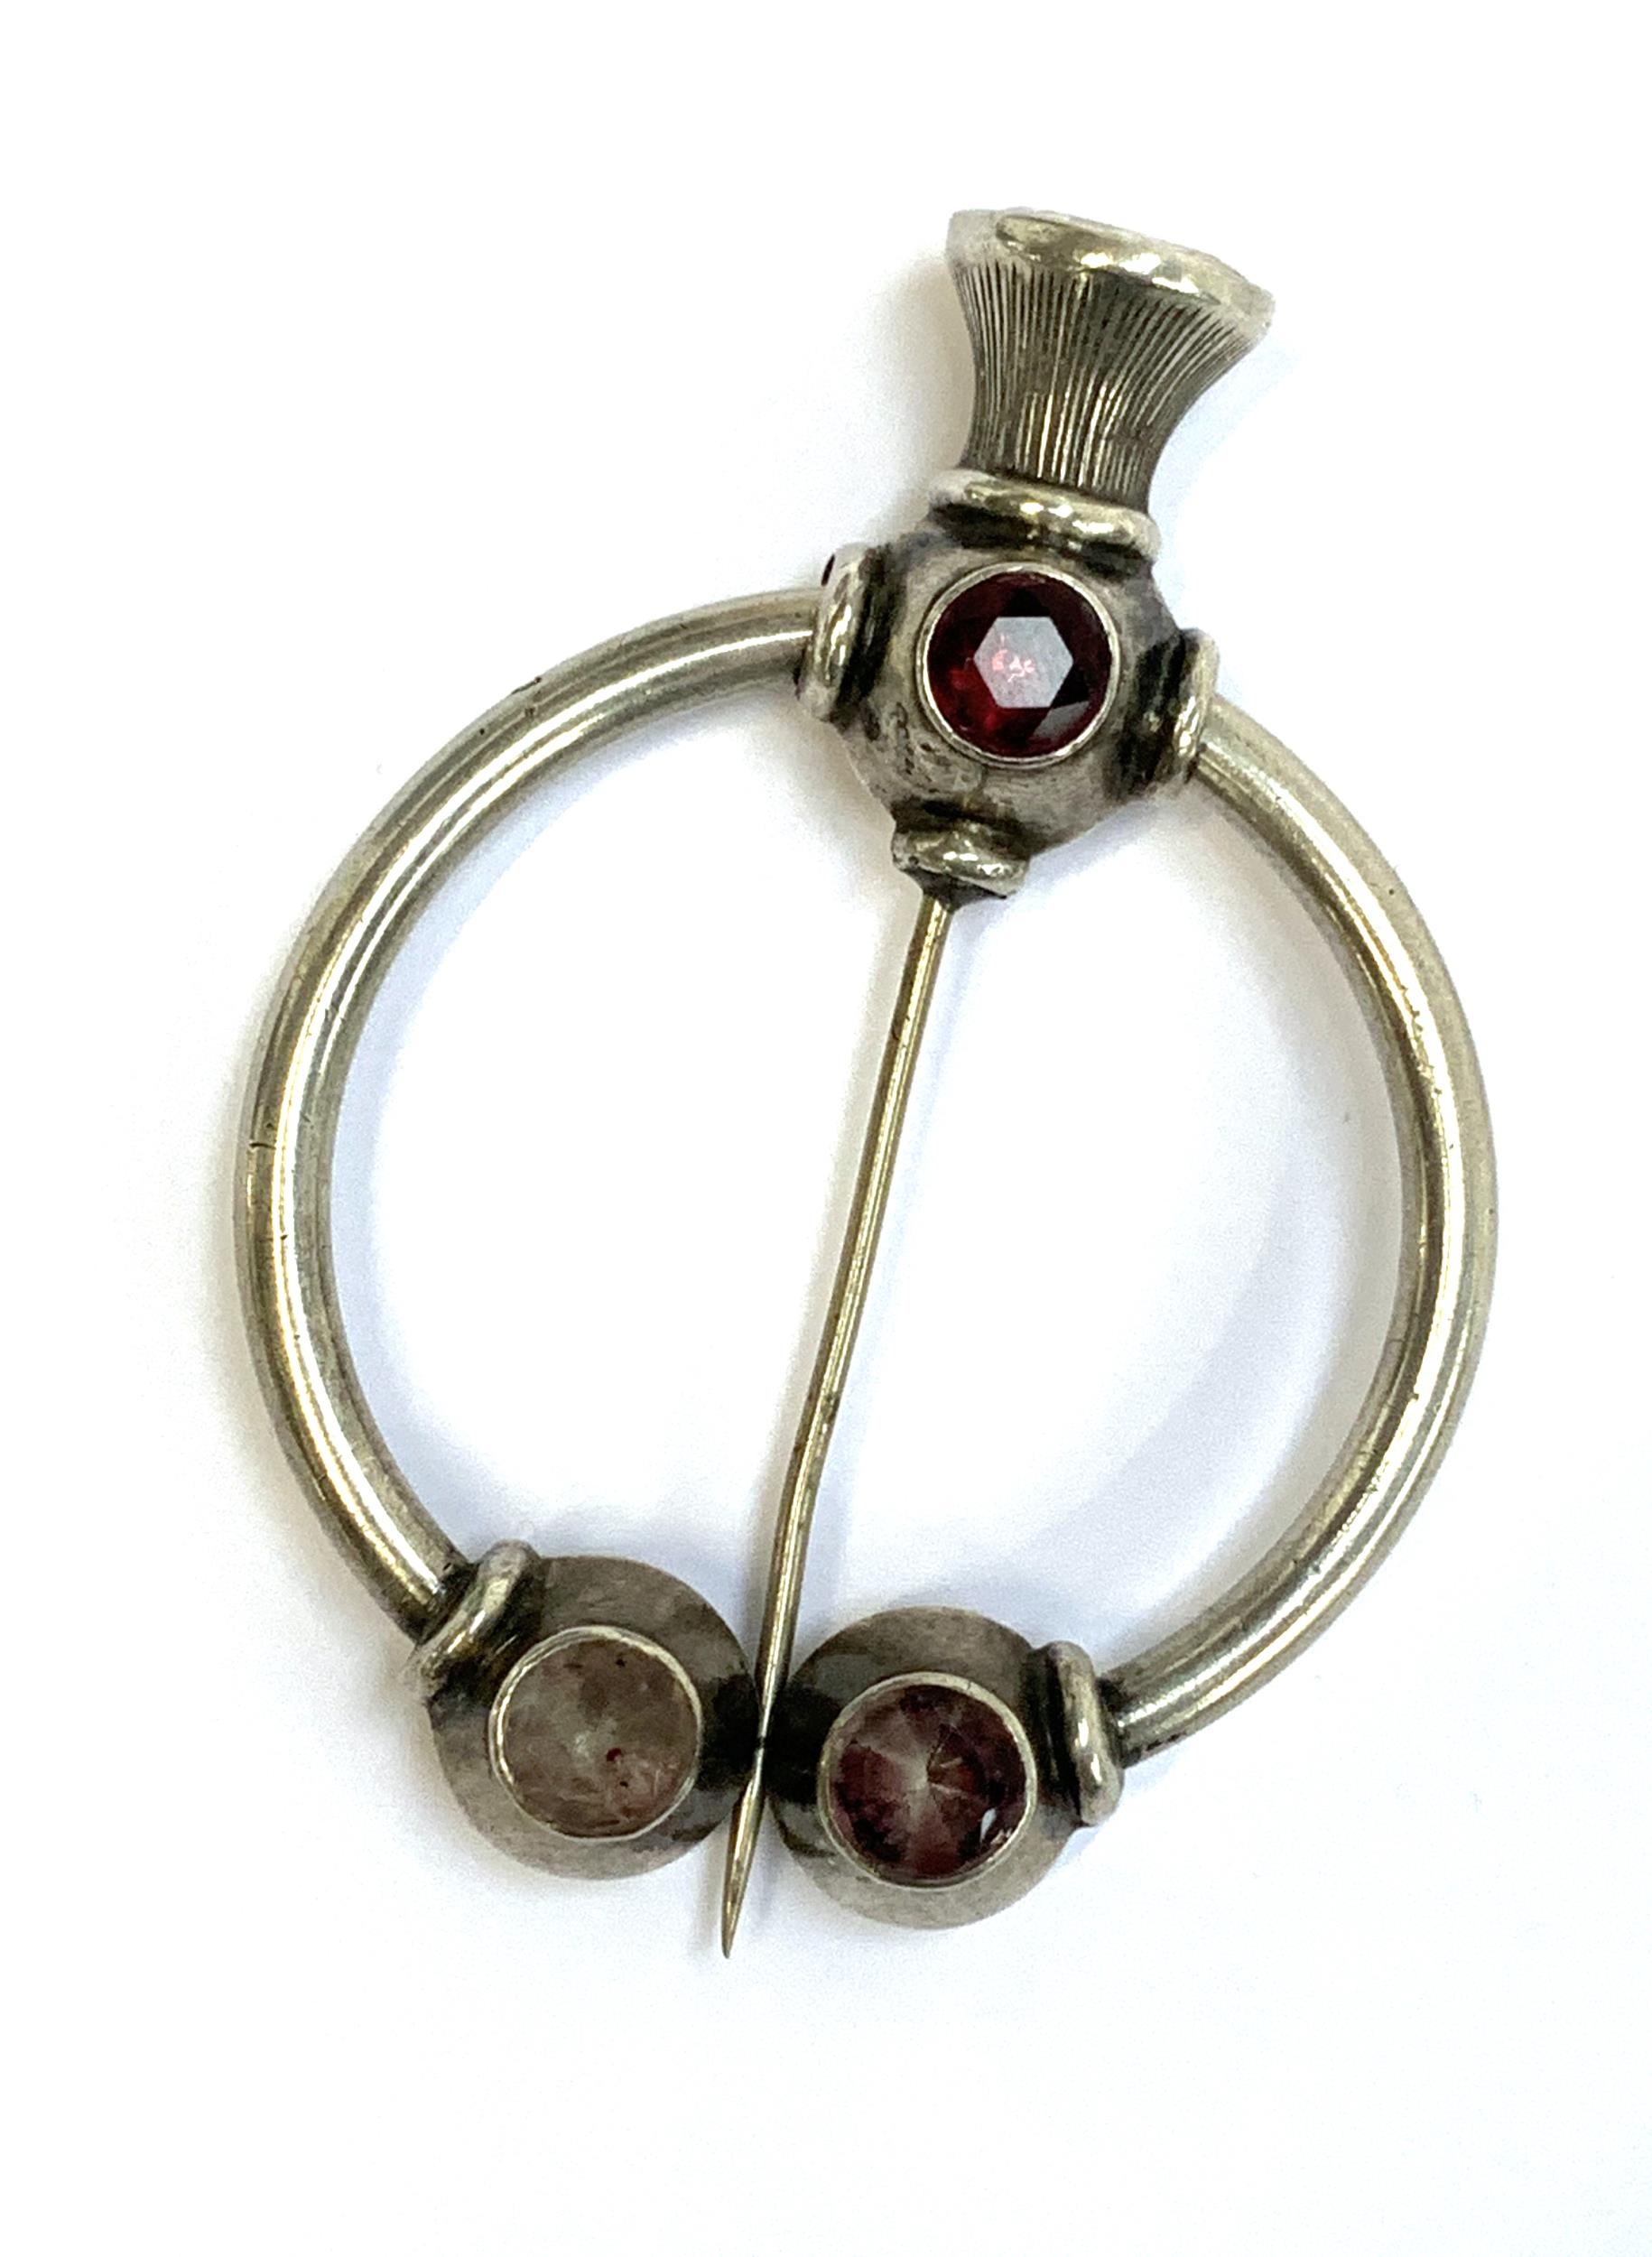 A Victorian silver Scottish penannular brooch set with foiled stones, with a thistle shaped pin